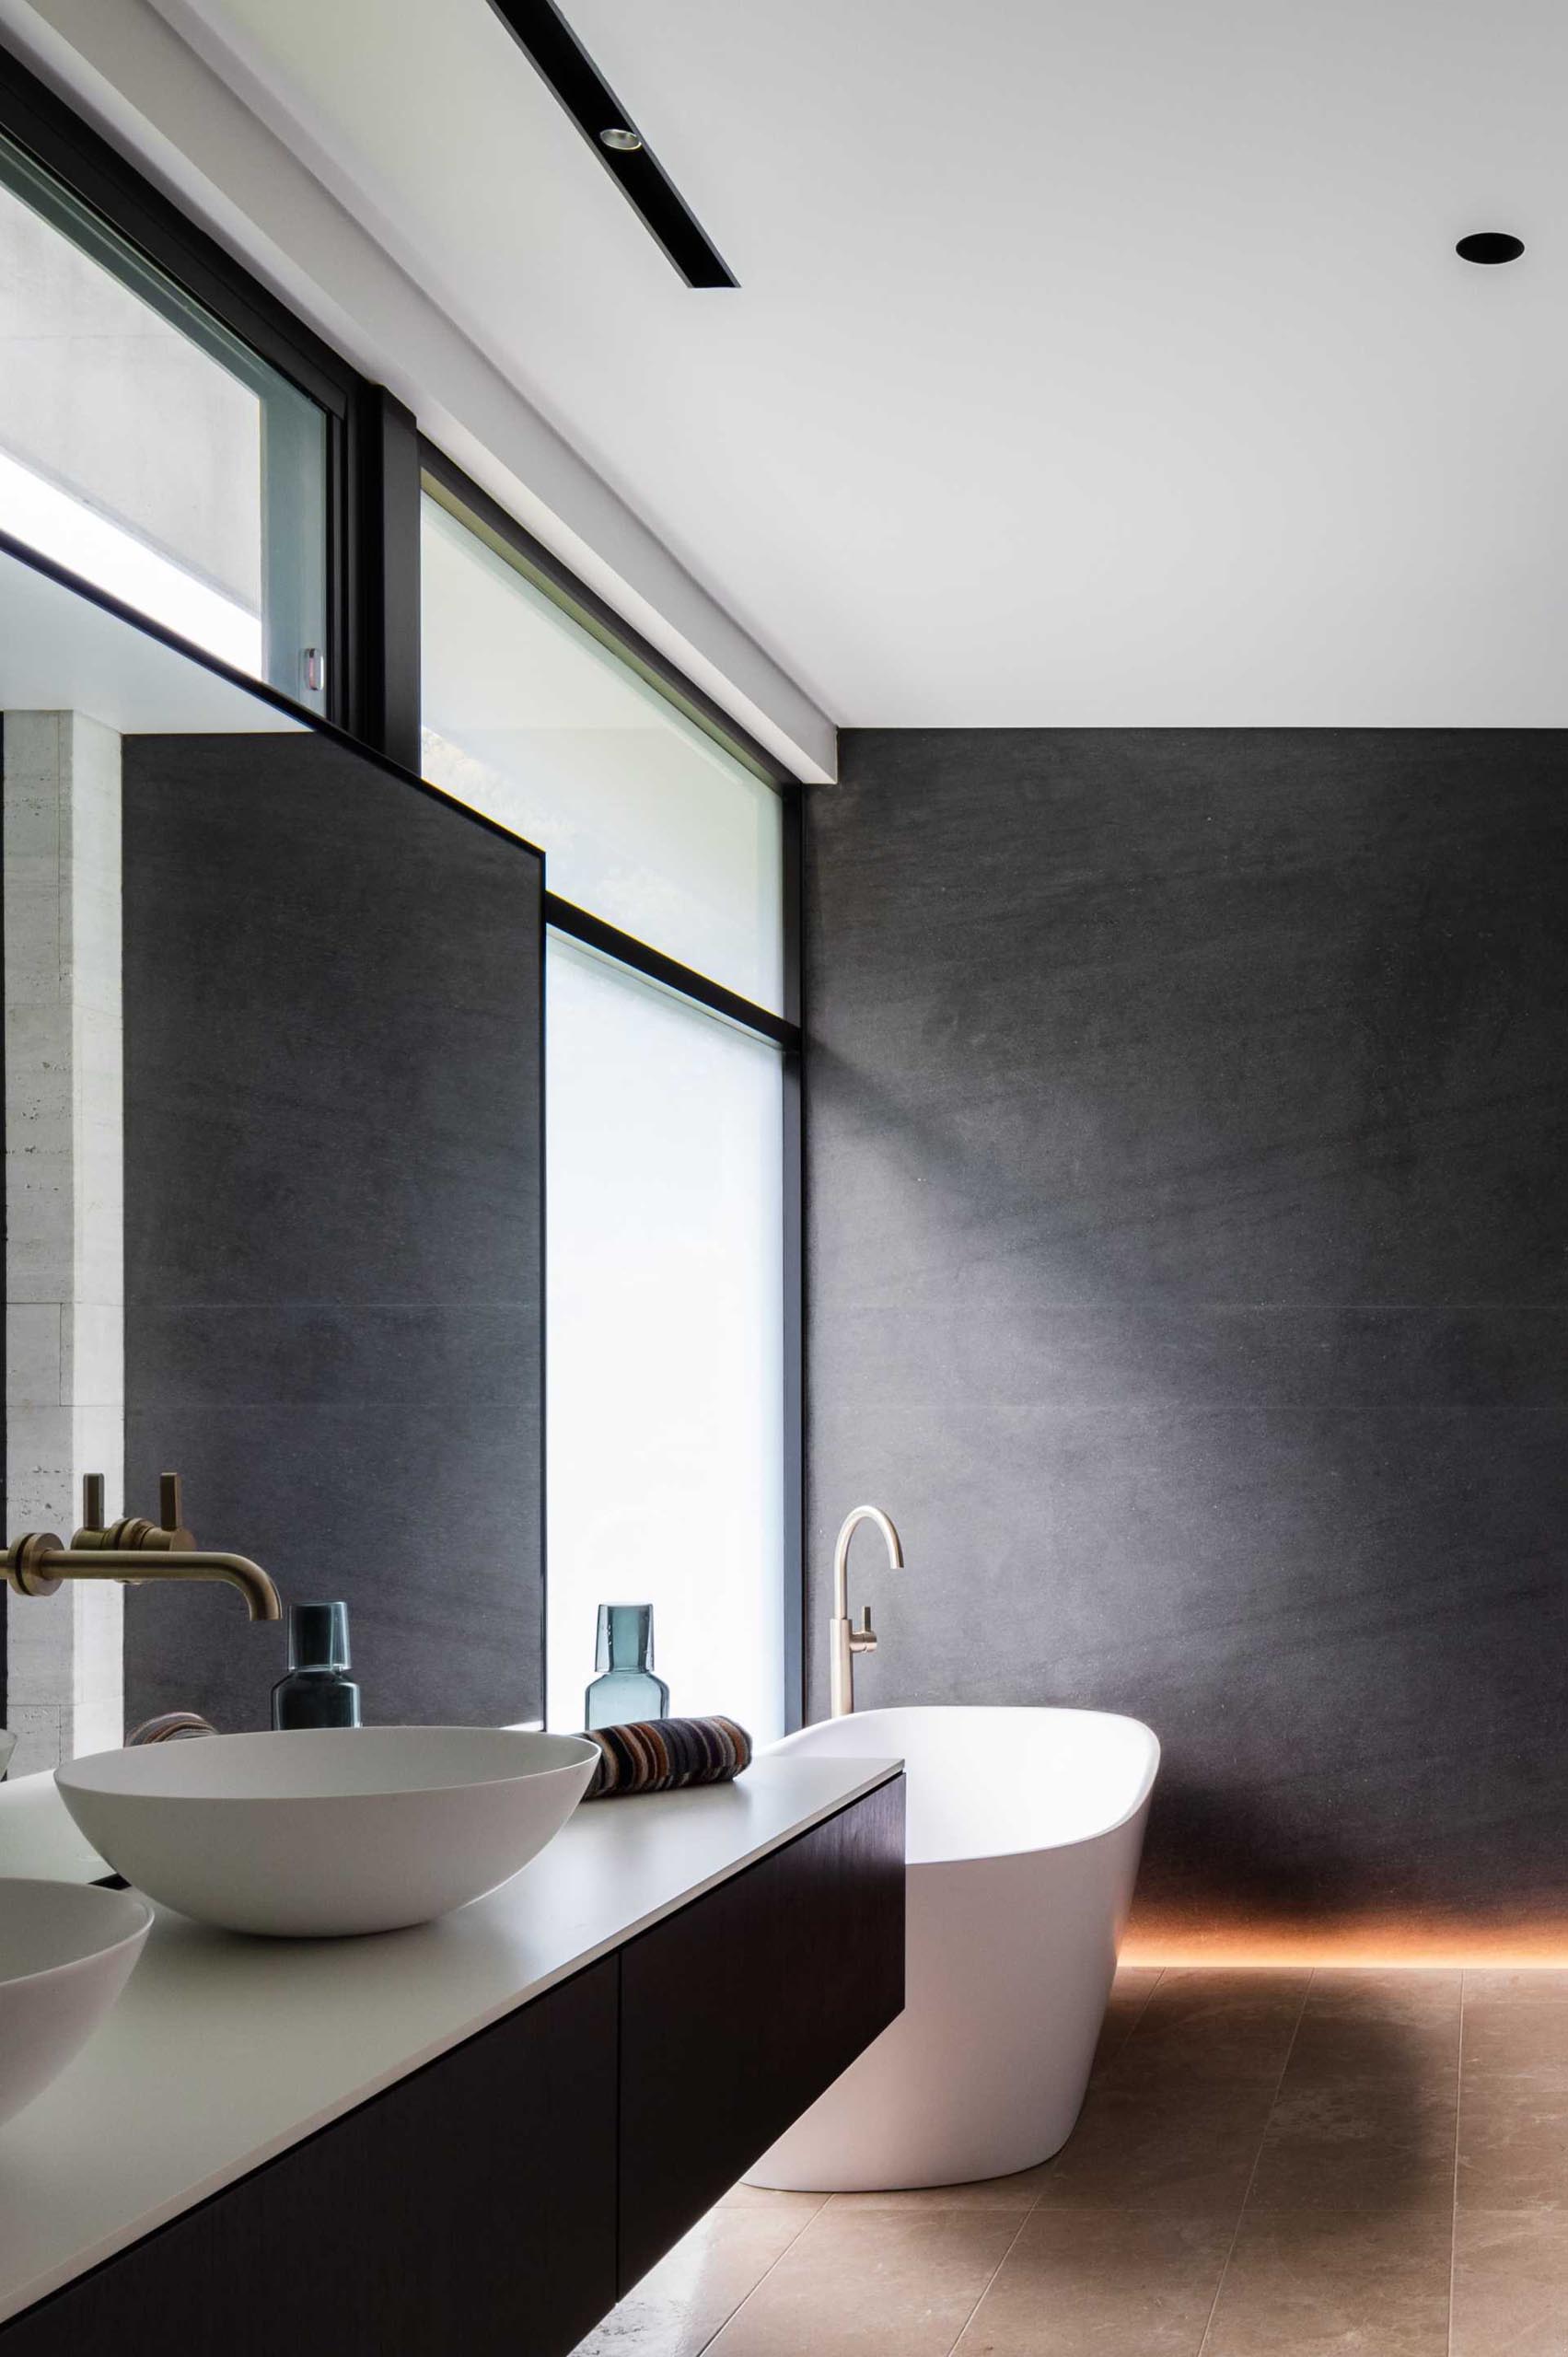 In this modern bathroom, the black window frames and vanity complement the dark accent wall, while a freestanding bathtub has been placed in front of a window that overlooks the backyard.